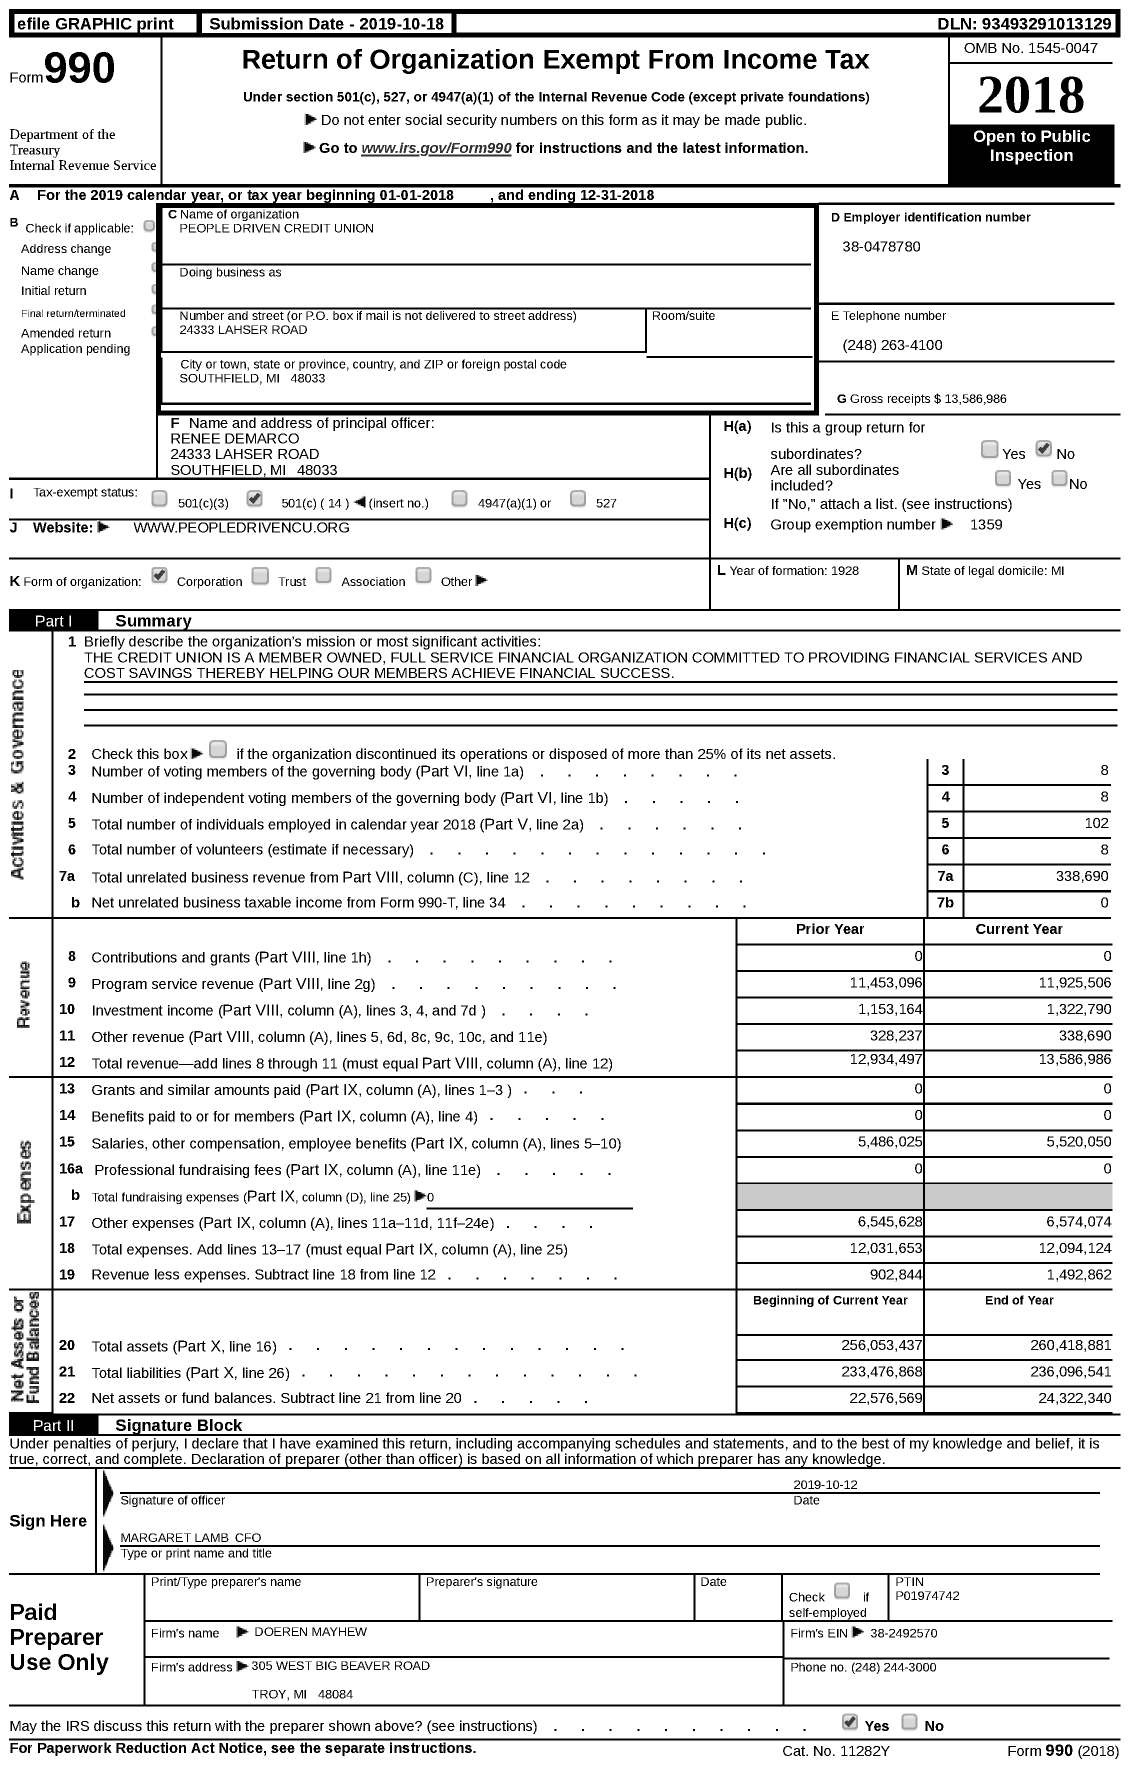 Image of first page of 2018 Form 990 for People Driven Credit Union (PDCU)